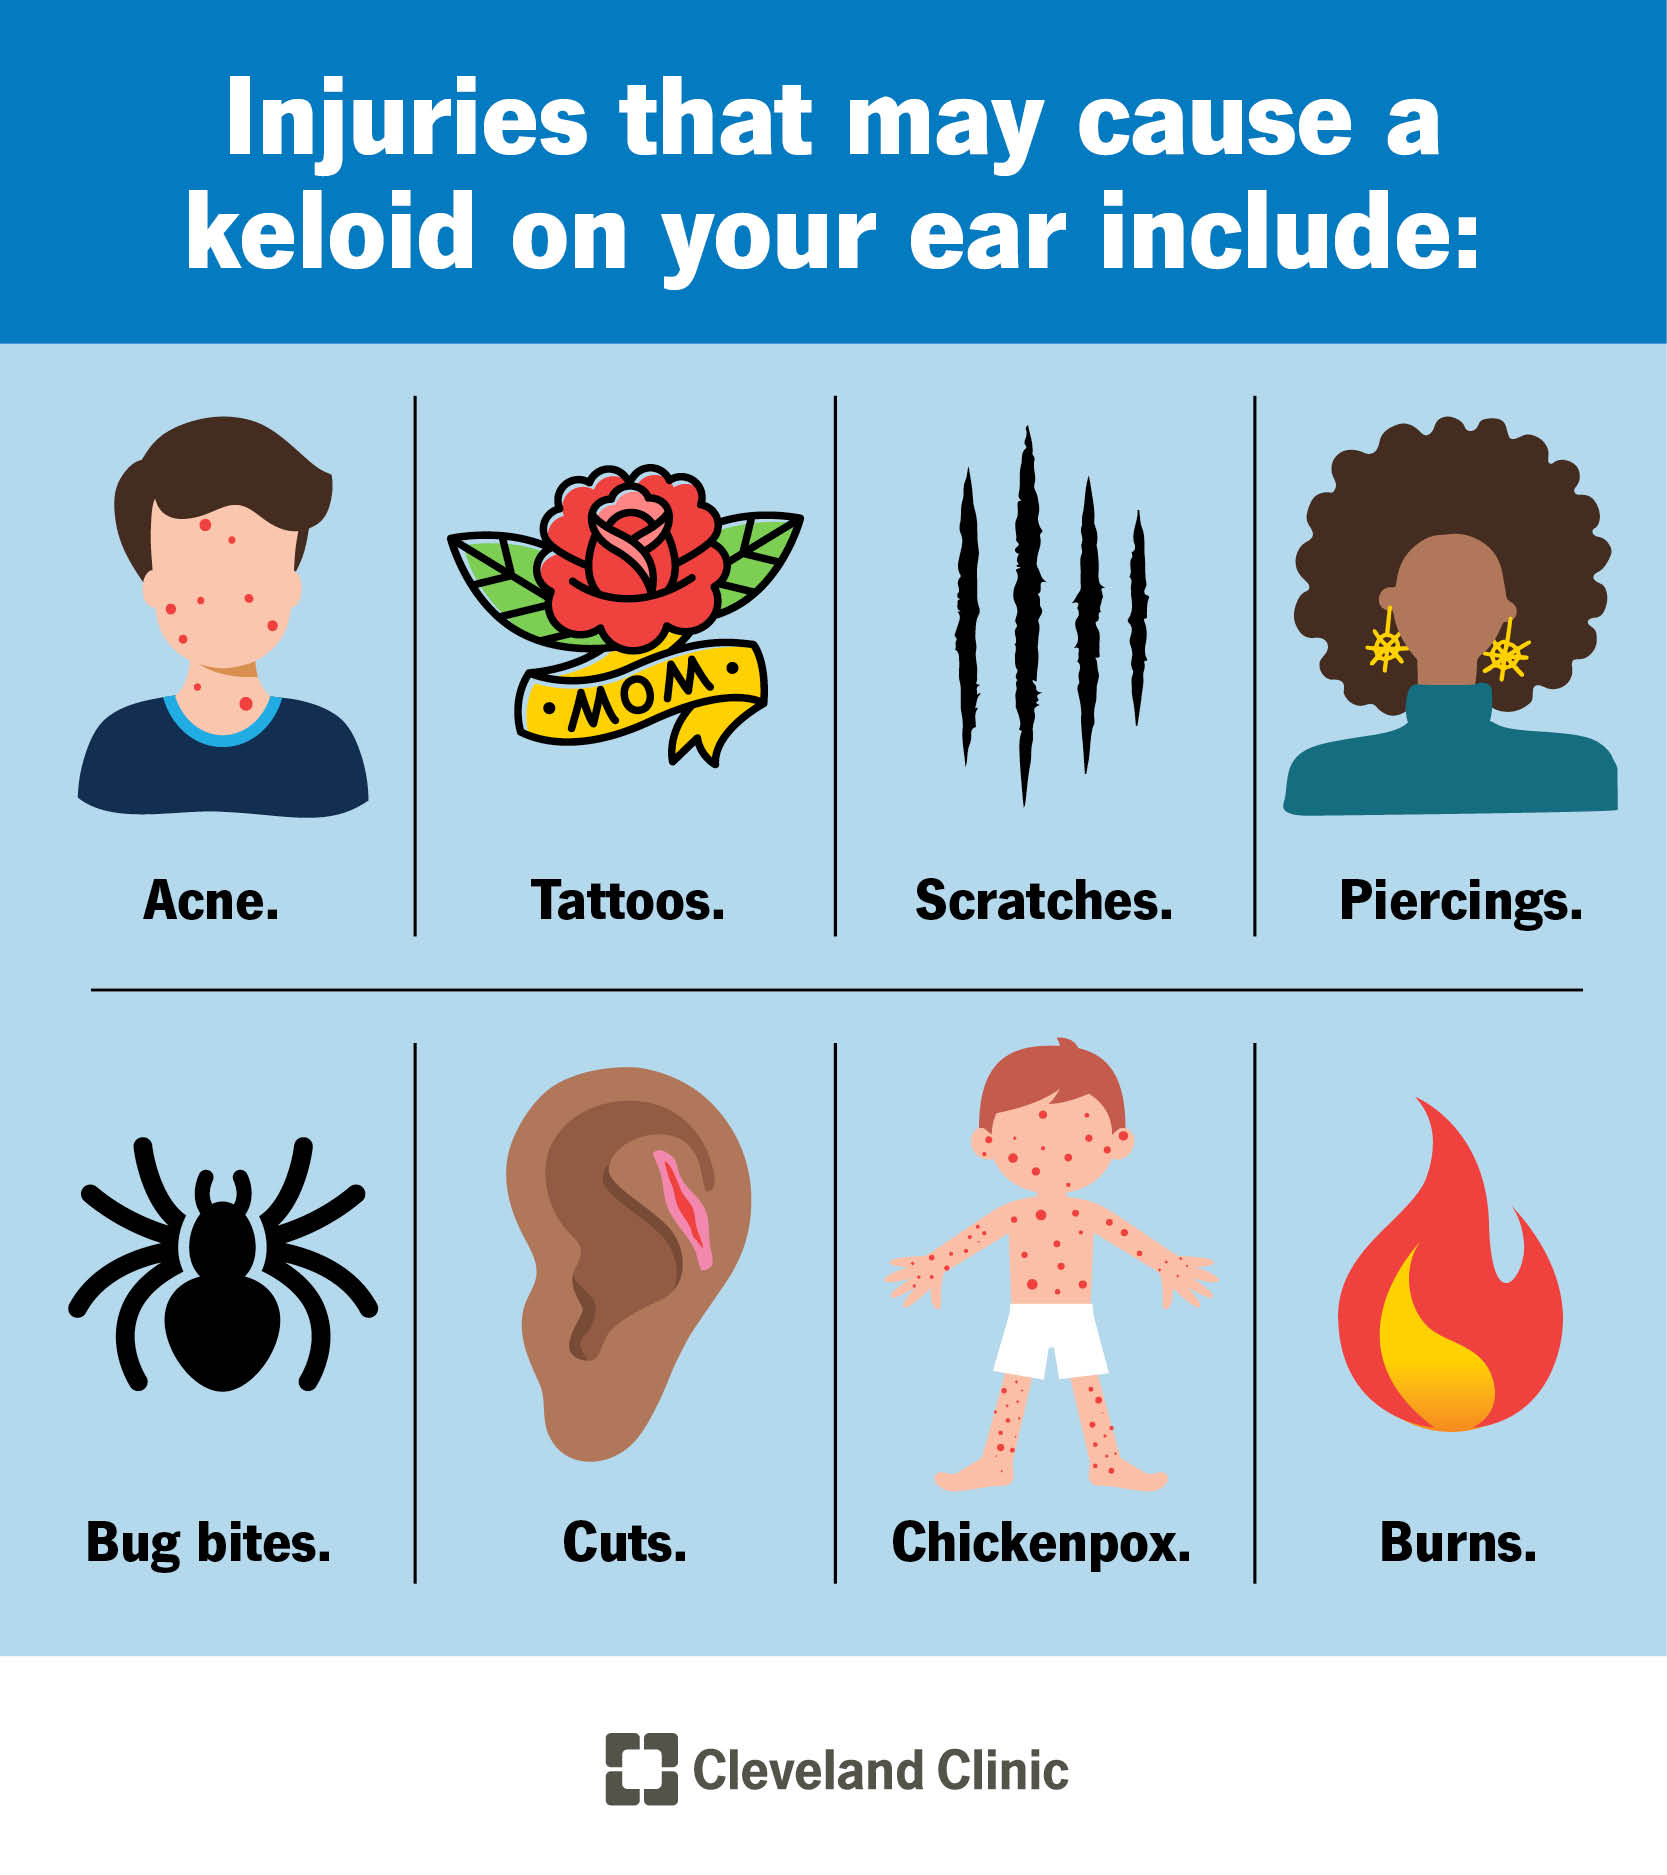 Common causes of keloids on your ear, including acne, tattoos, scratches, piercings, bug bites, cuts, chickenpox and burns.